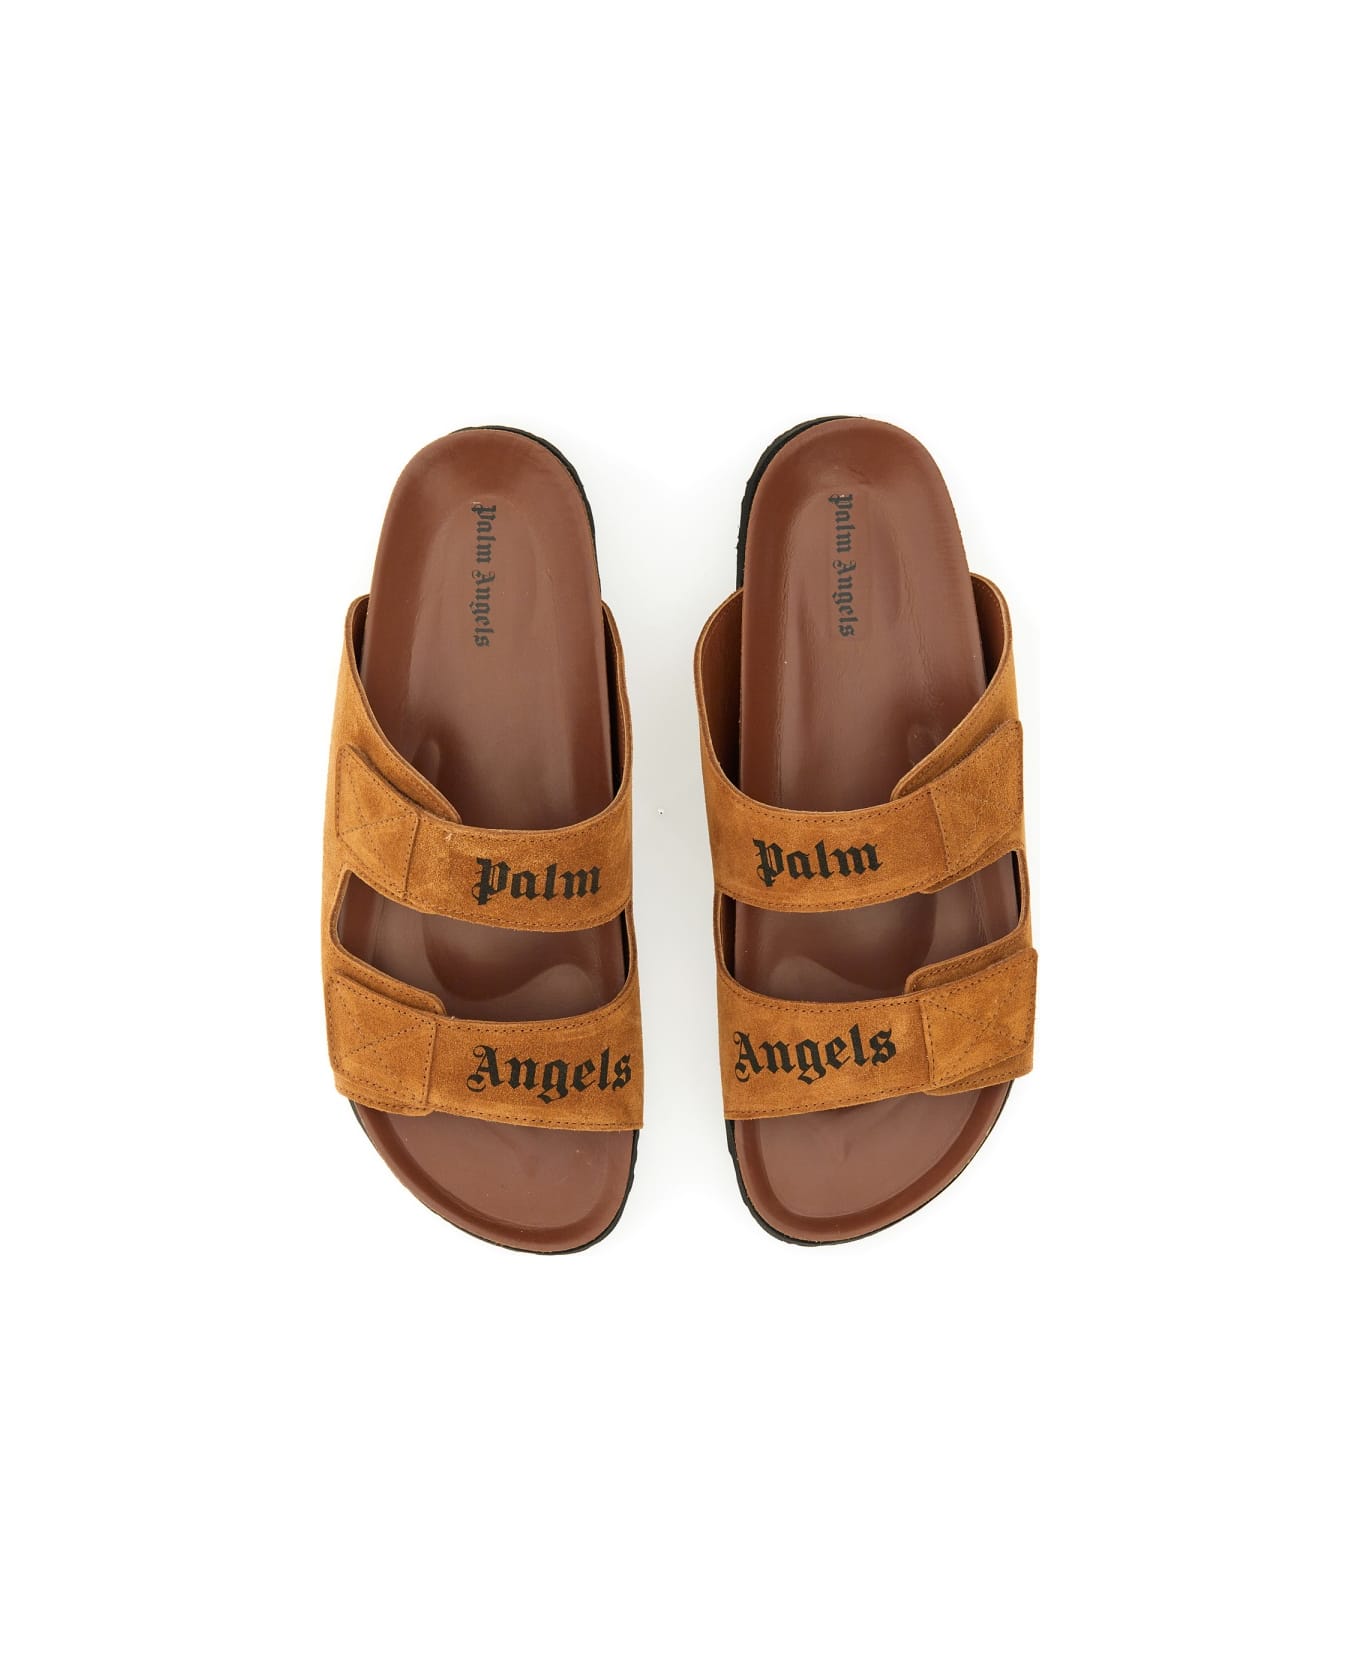 Palm Angels Leather Sandal - BEIGE その他各種シューズ